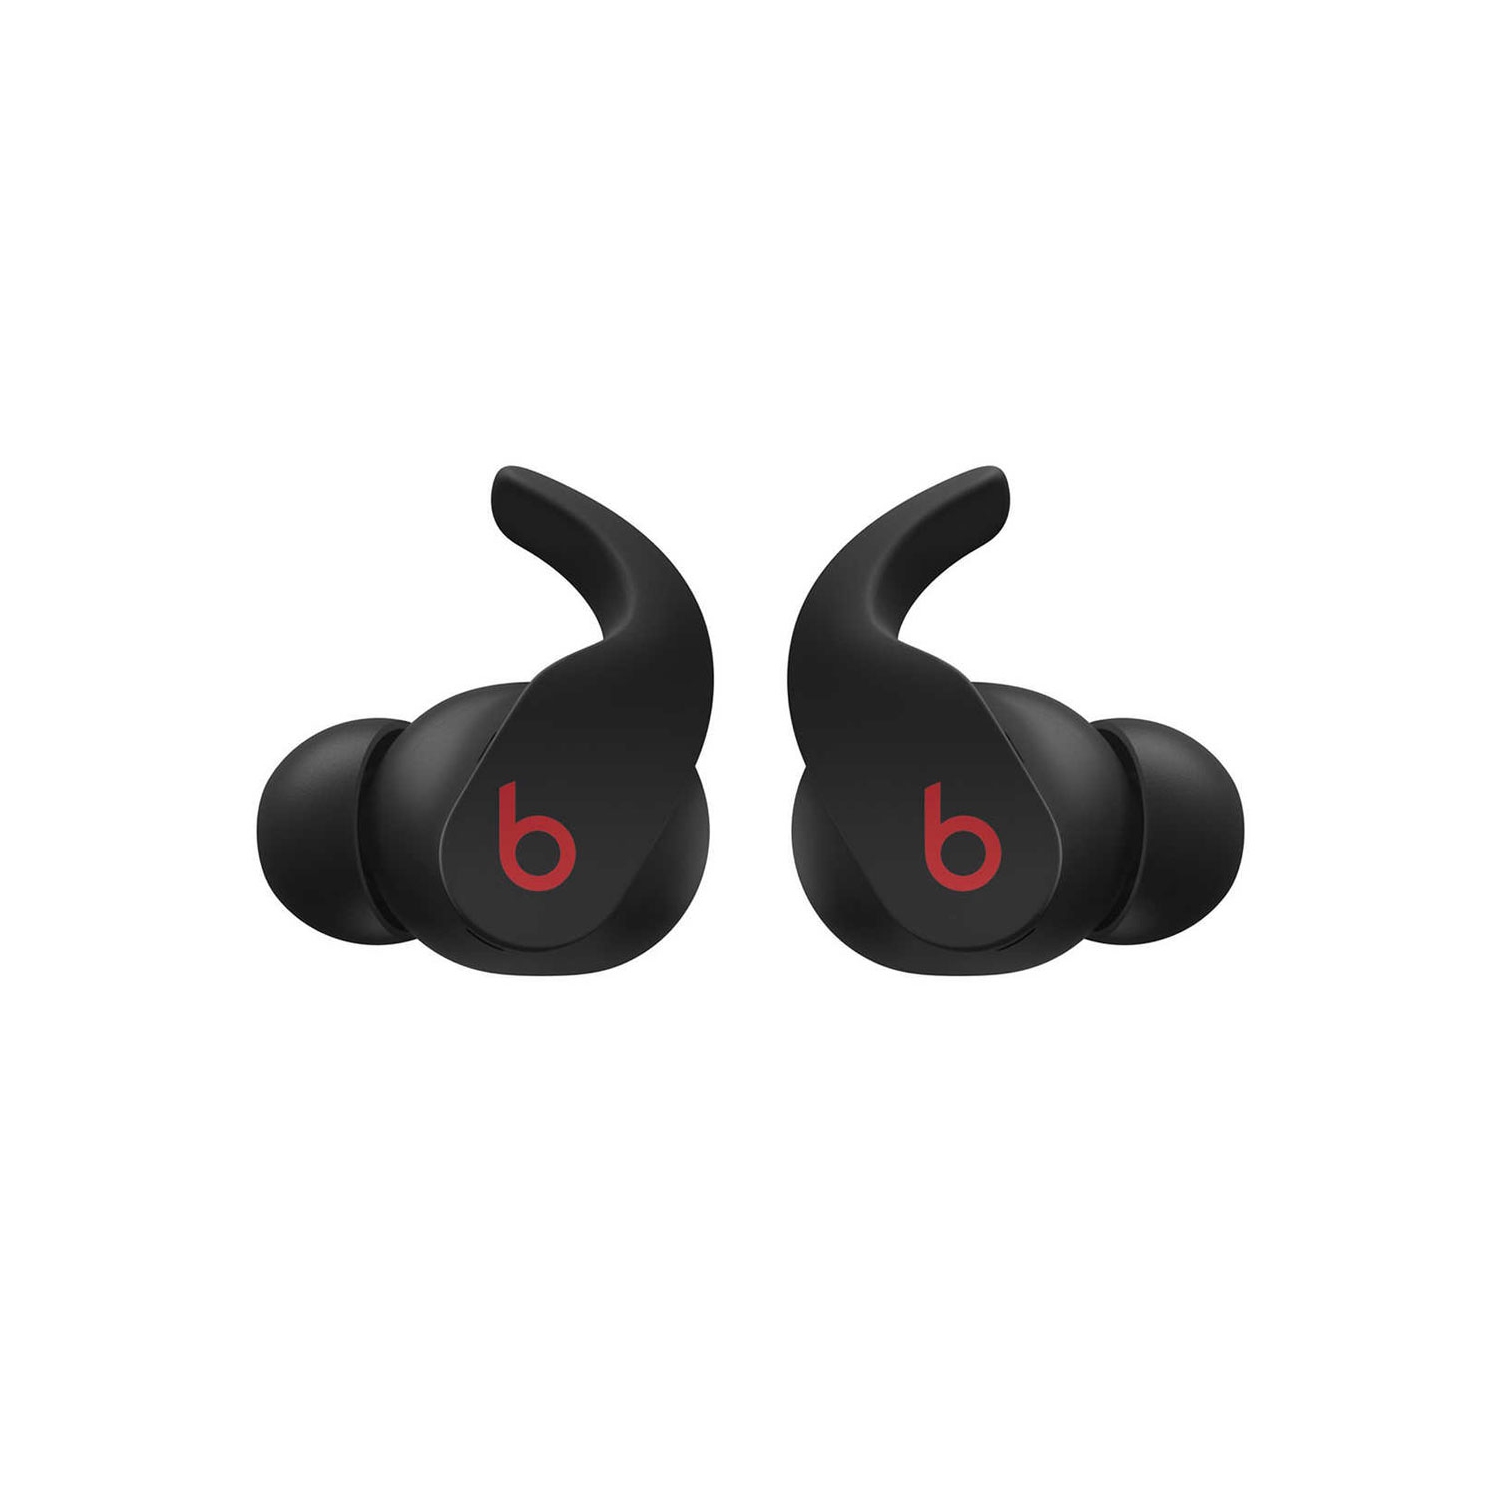 Beats By Dr. Dre Fit Pro In-Ear Noise Cancelling Truly Wireless Headphones - Black - Brand New